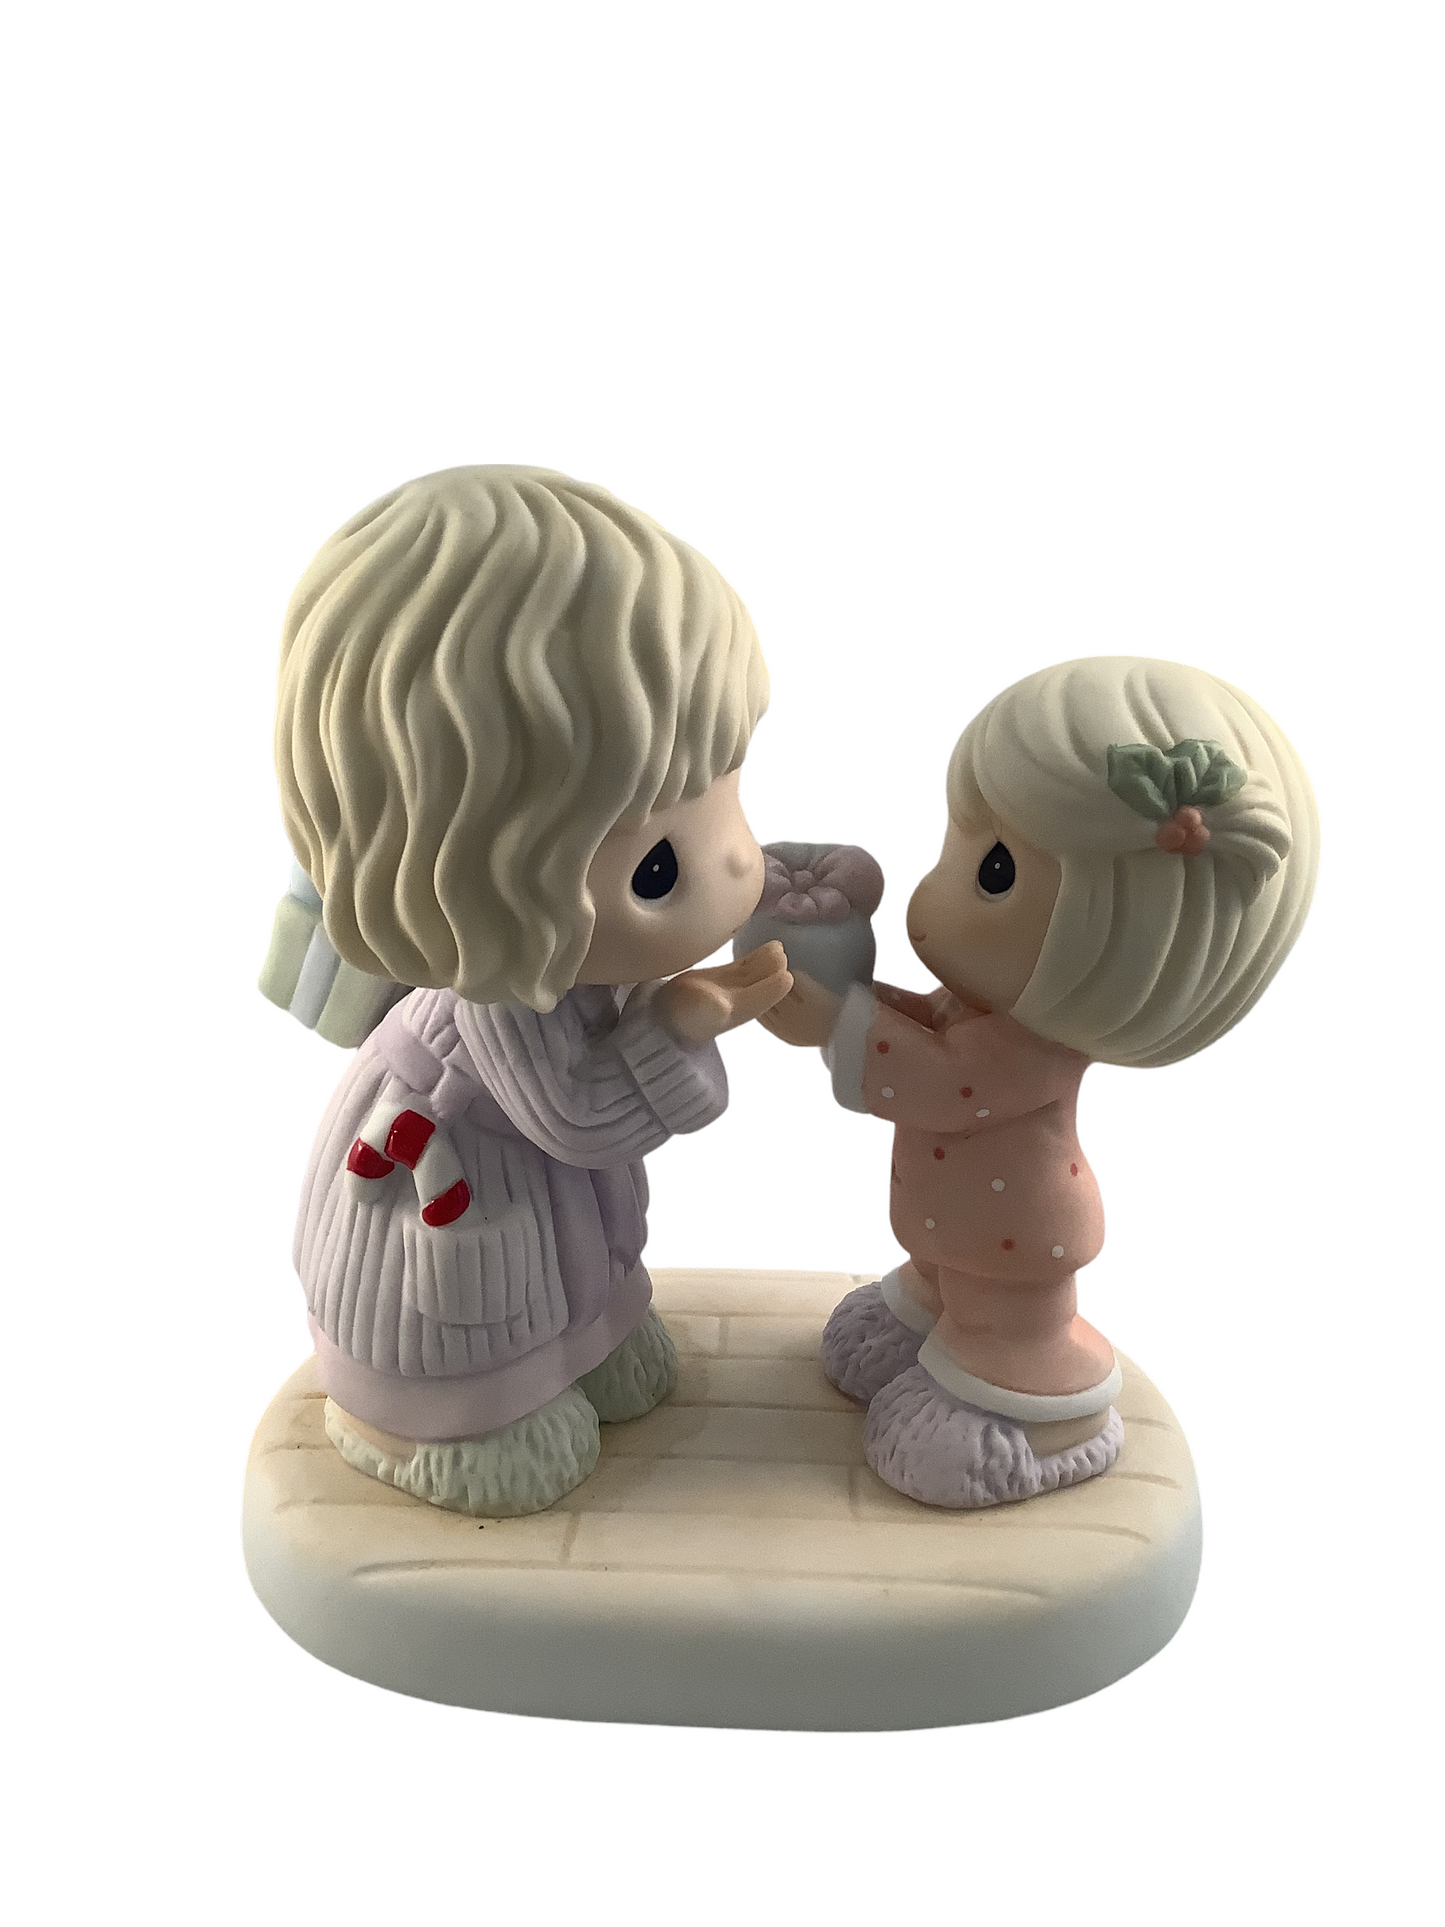 The Gift Is In The Giving - Precious Moment Figurine